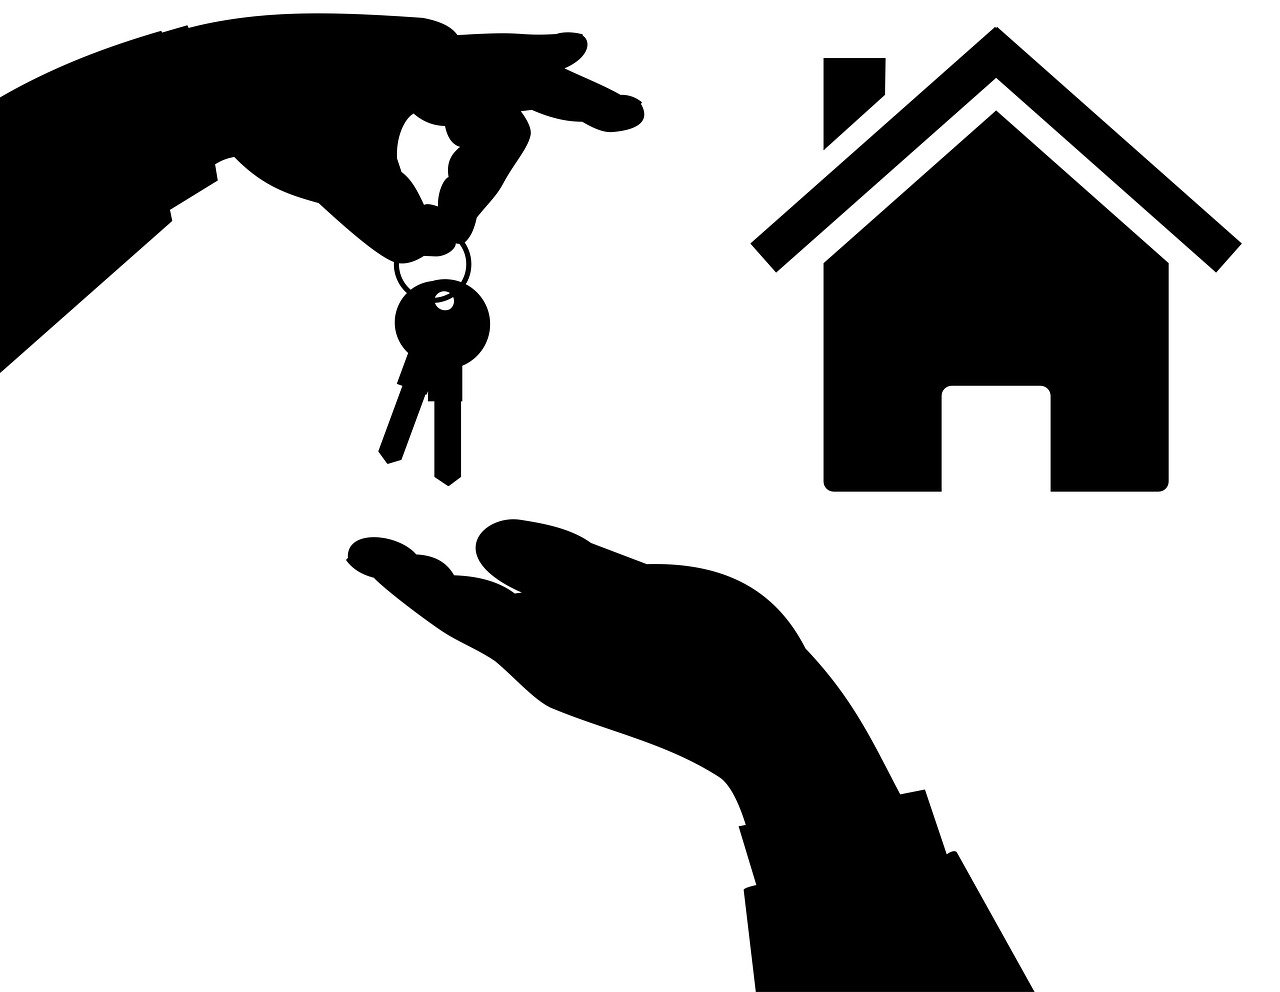 a person handing a house key to another person, an illustration of, pixabay, conceptual art, black silhouette, bump in form of hand, advert logo, carravaggion